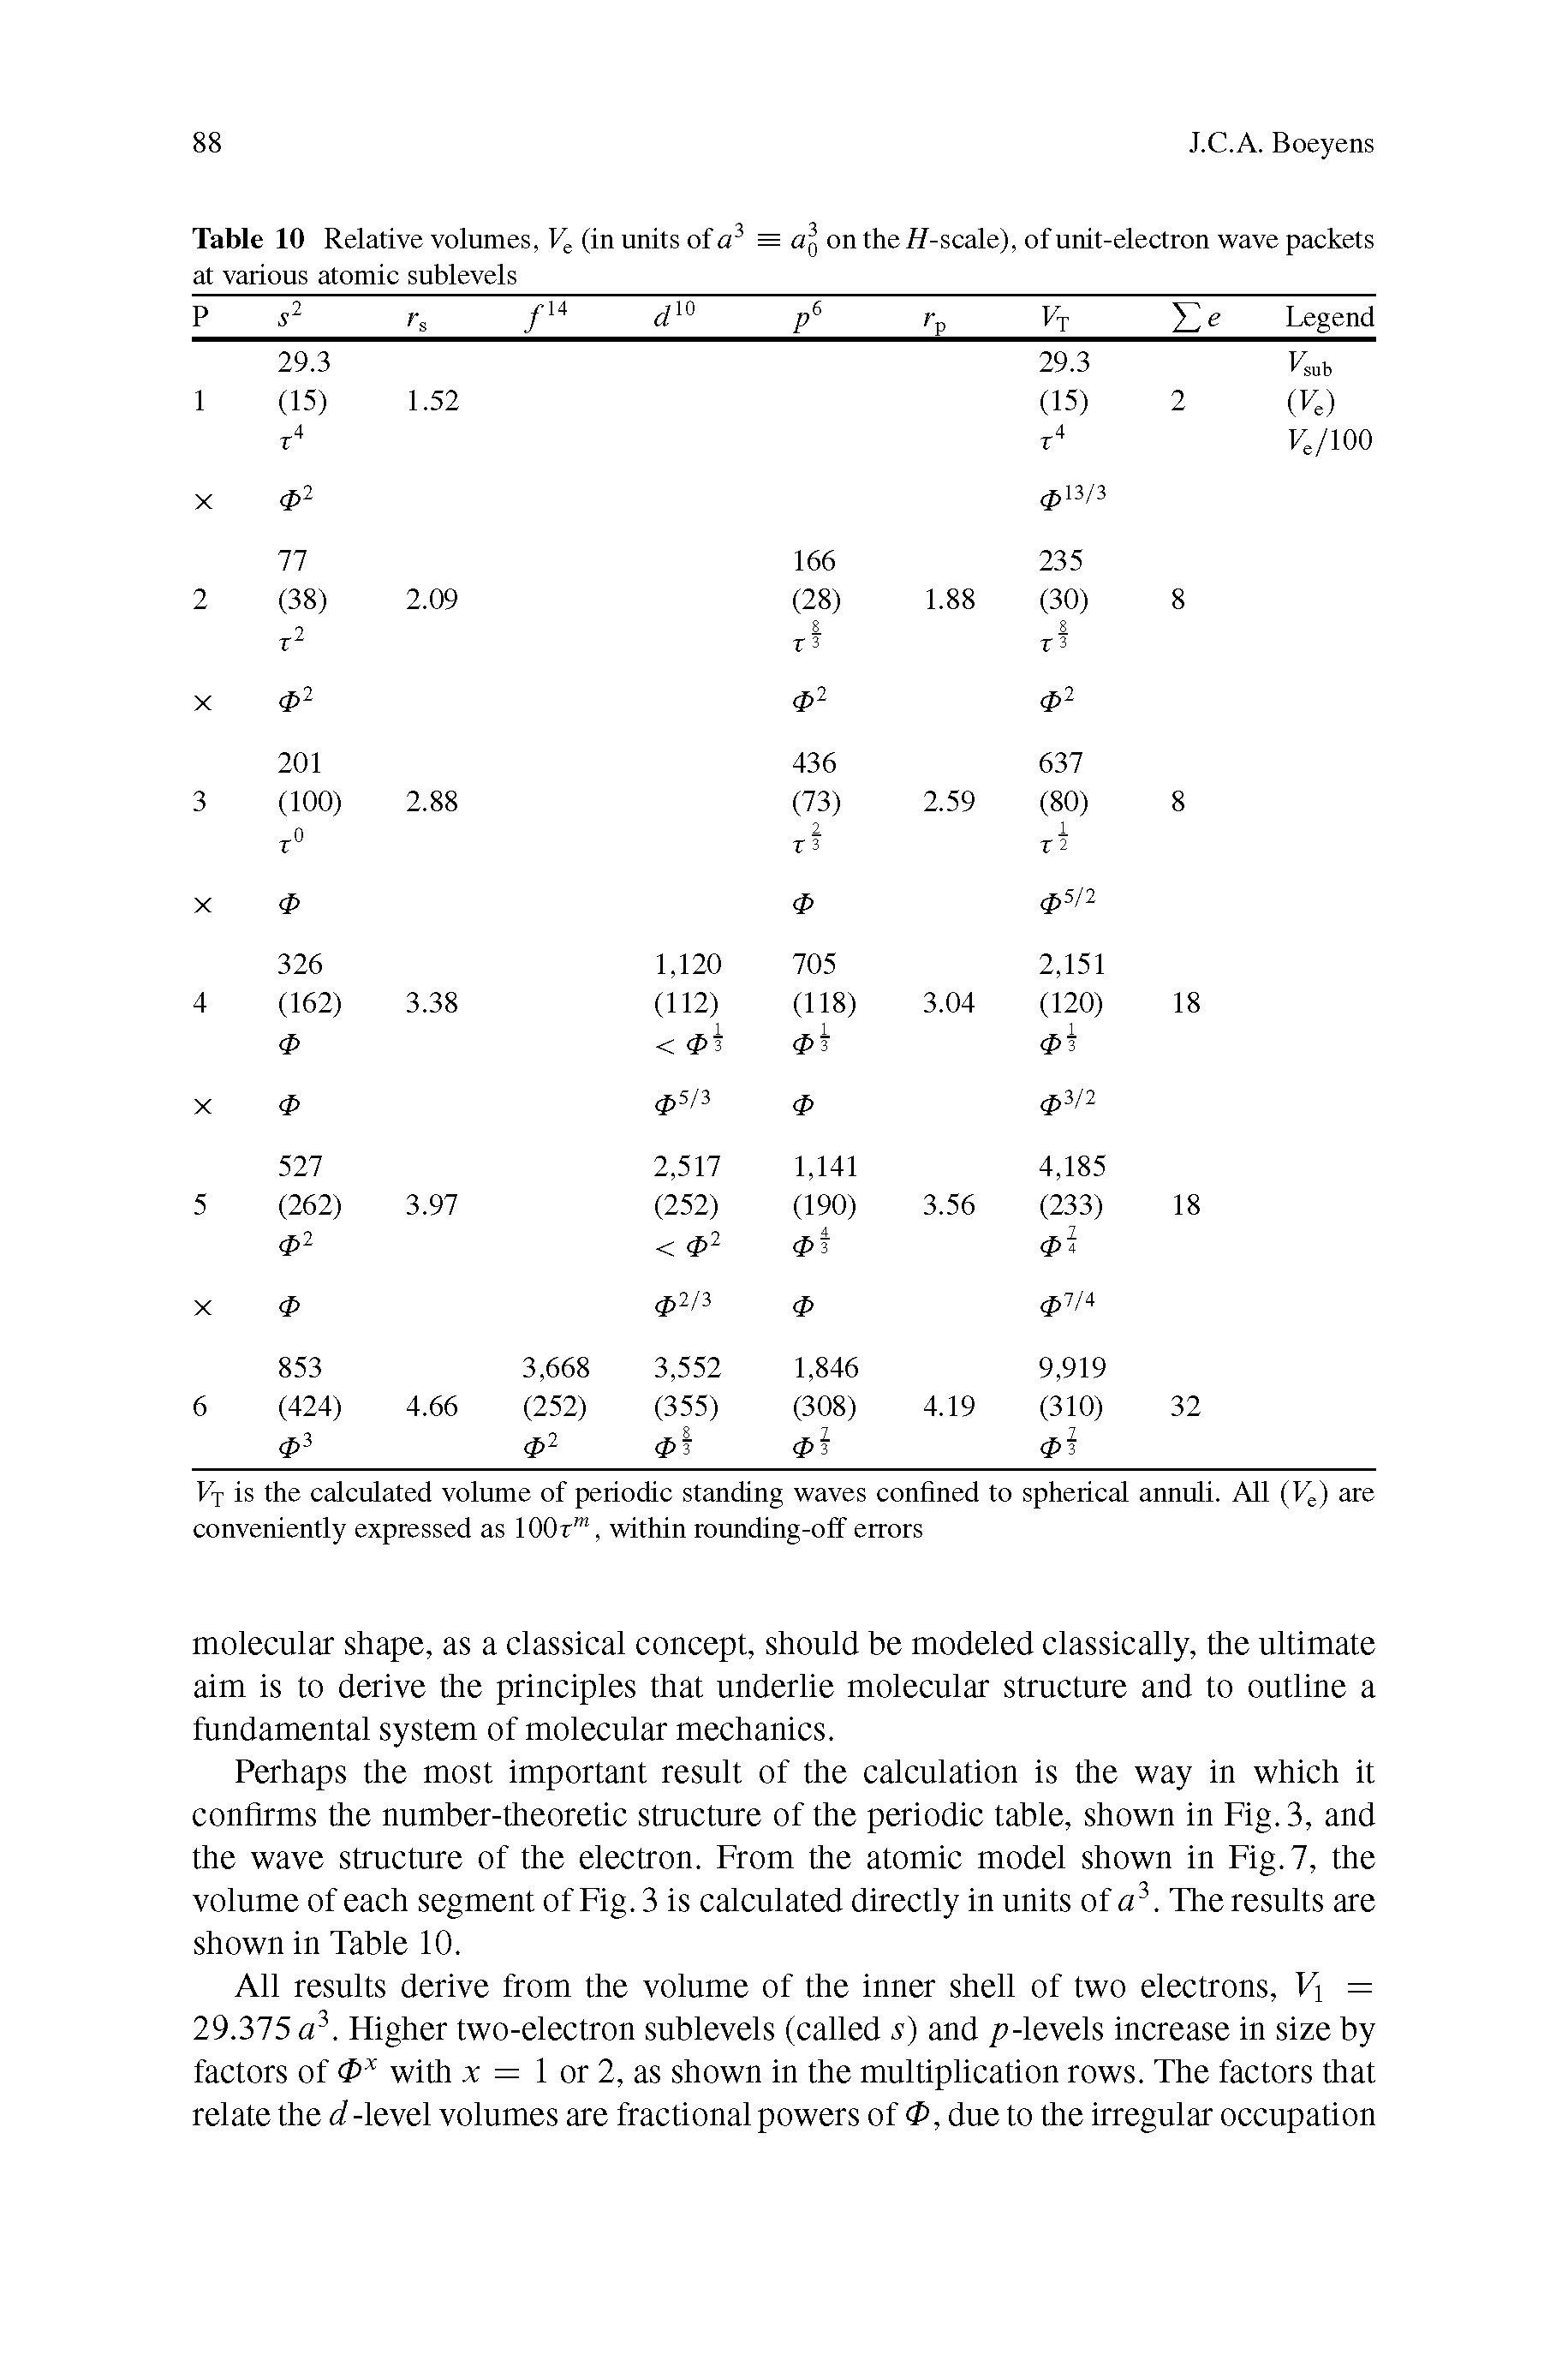 Table 10 Relative volumes, (in units of = Og on the //-scale), of unit-electron wave packets at various atomic sublevels...